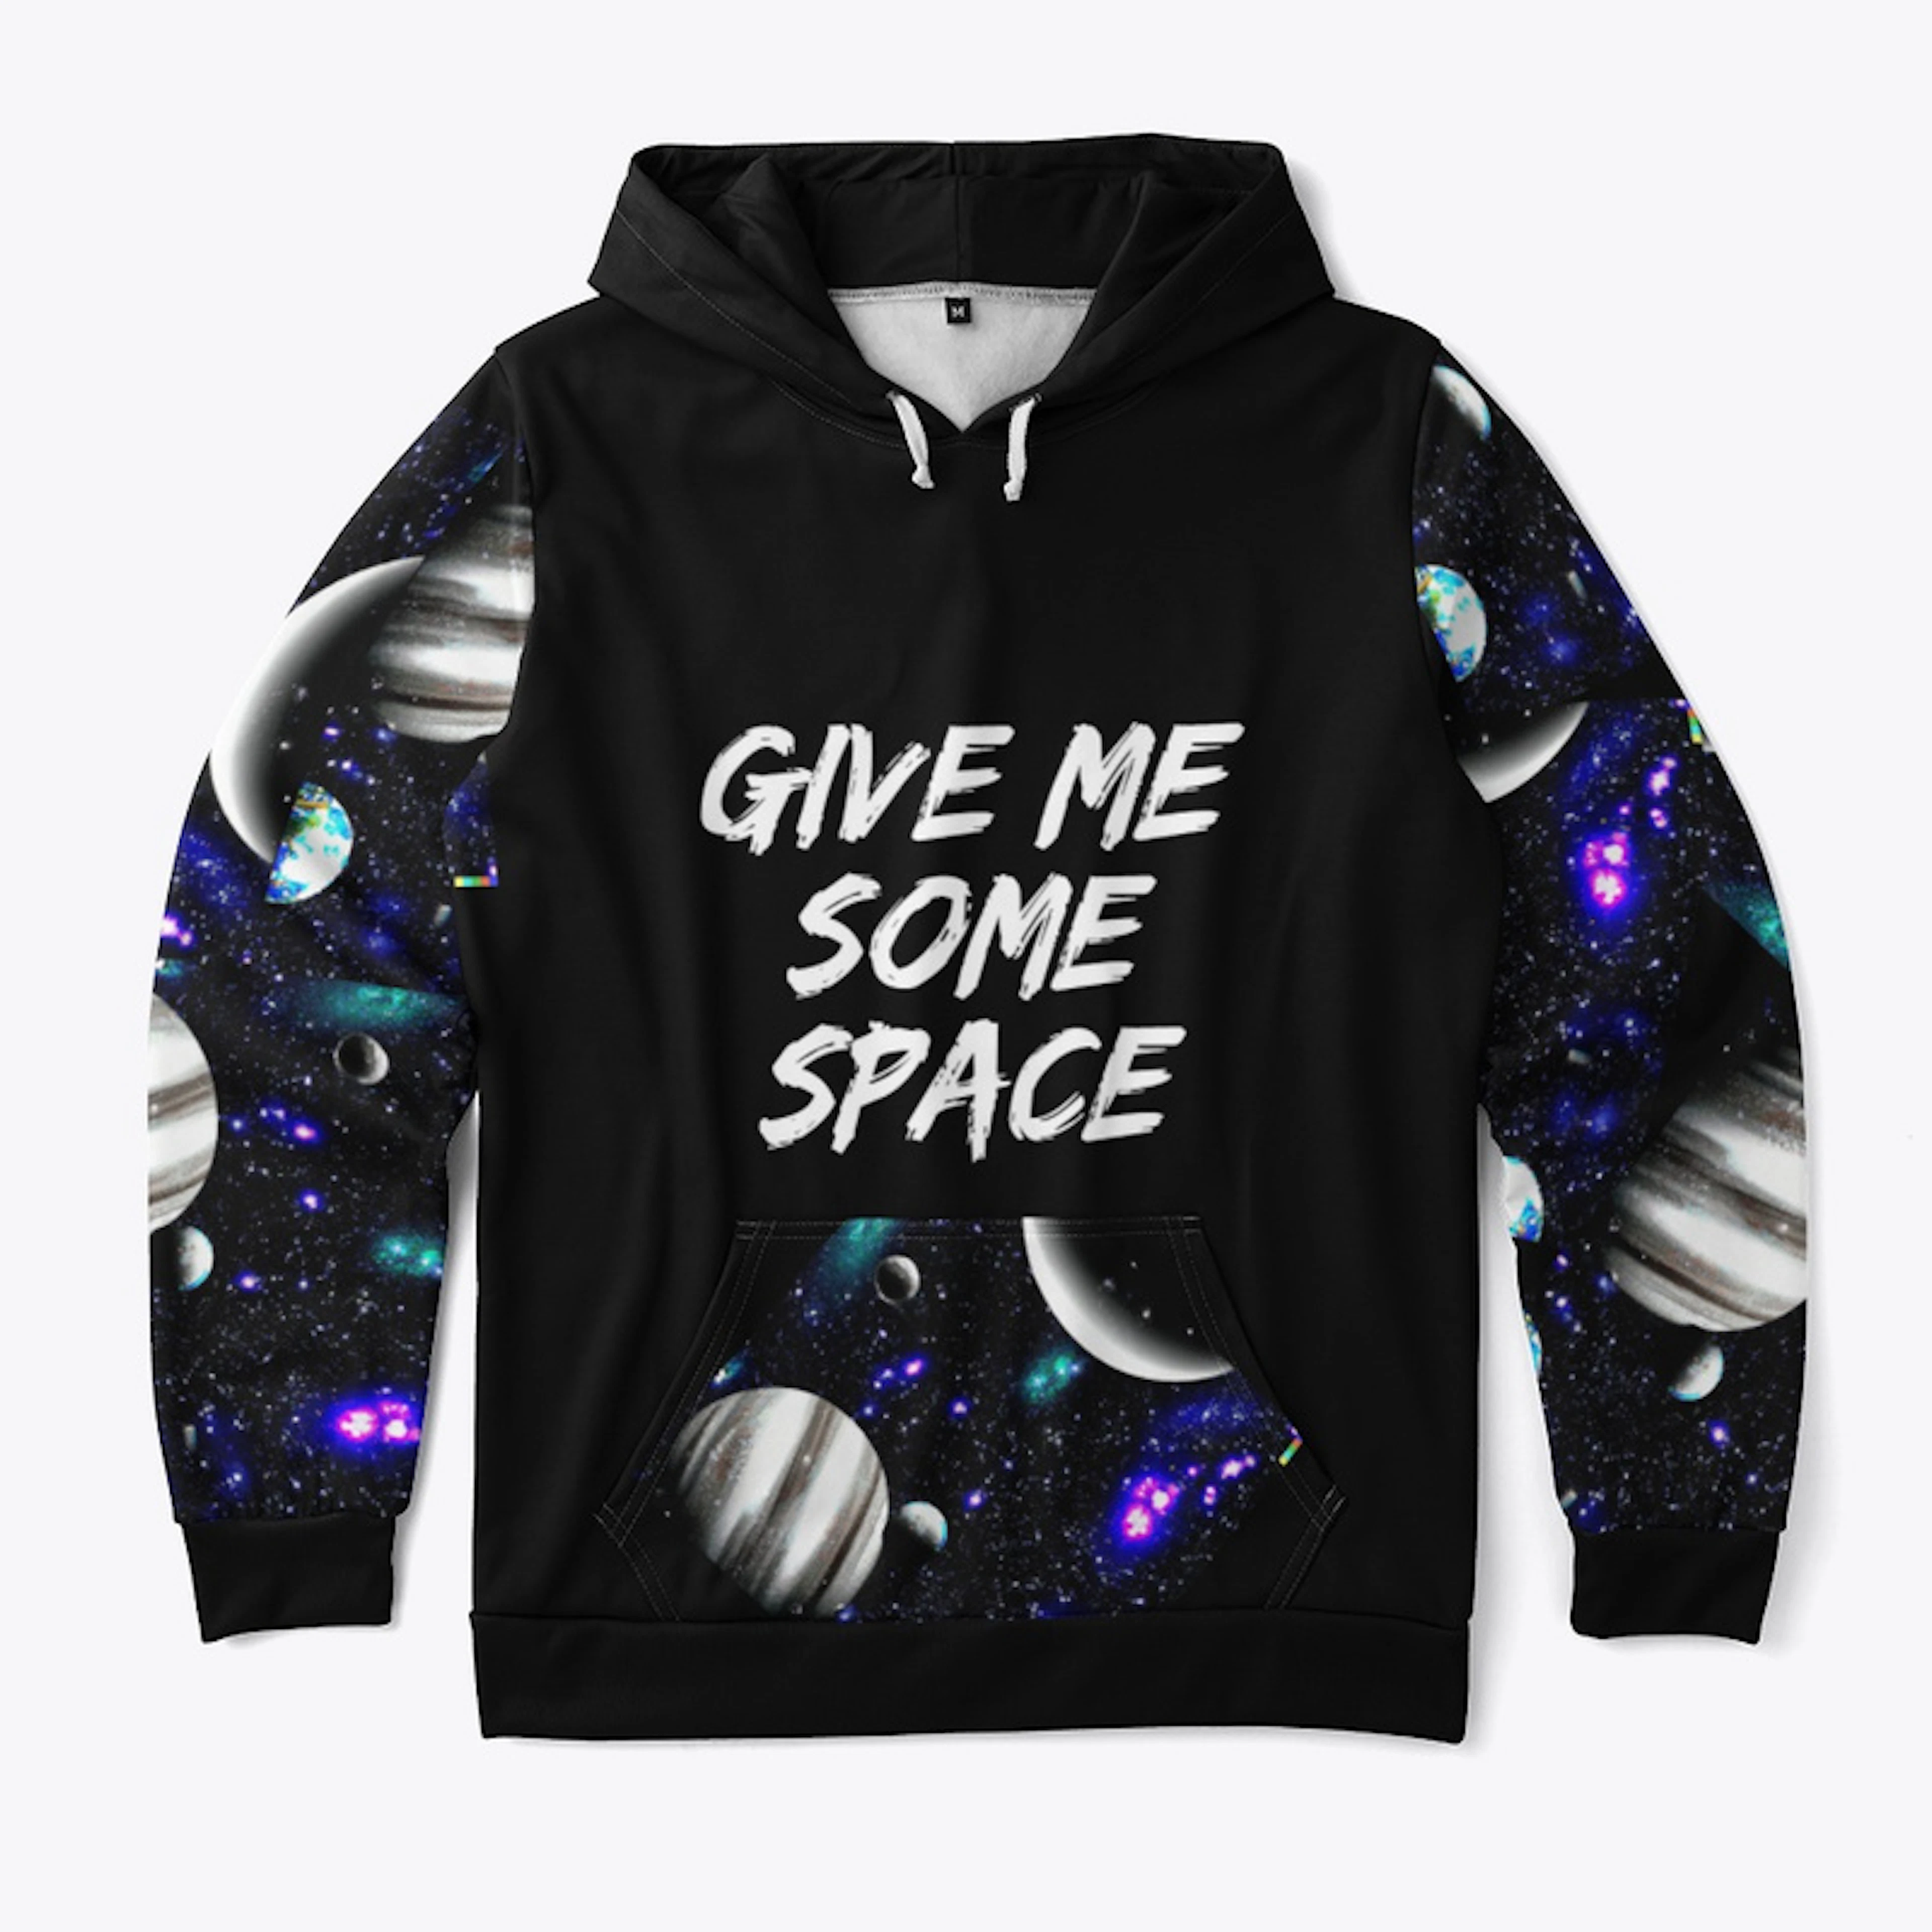 GIVE ME SOME SPACE